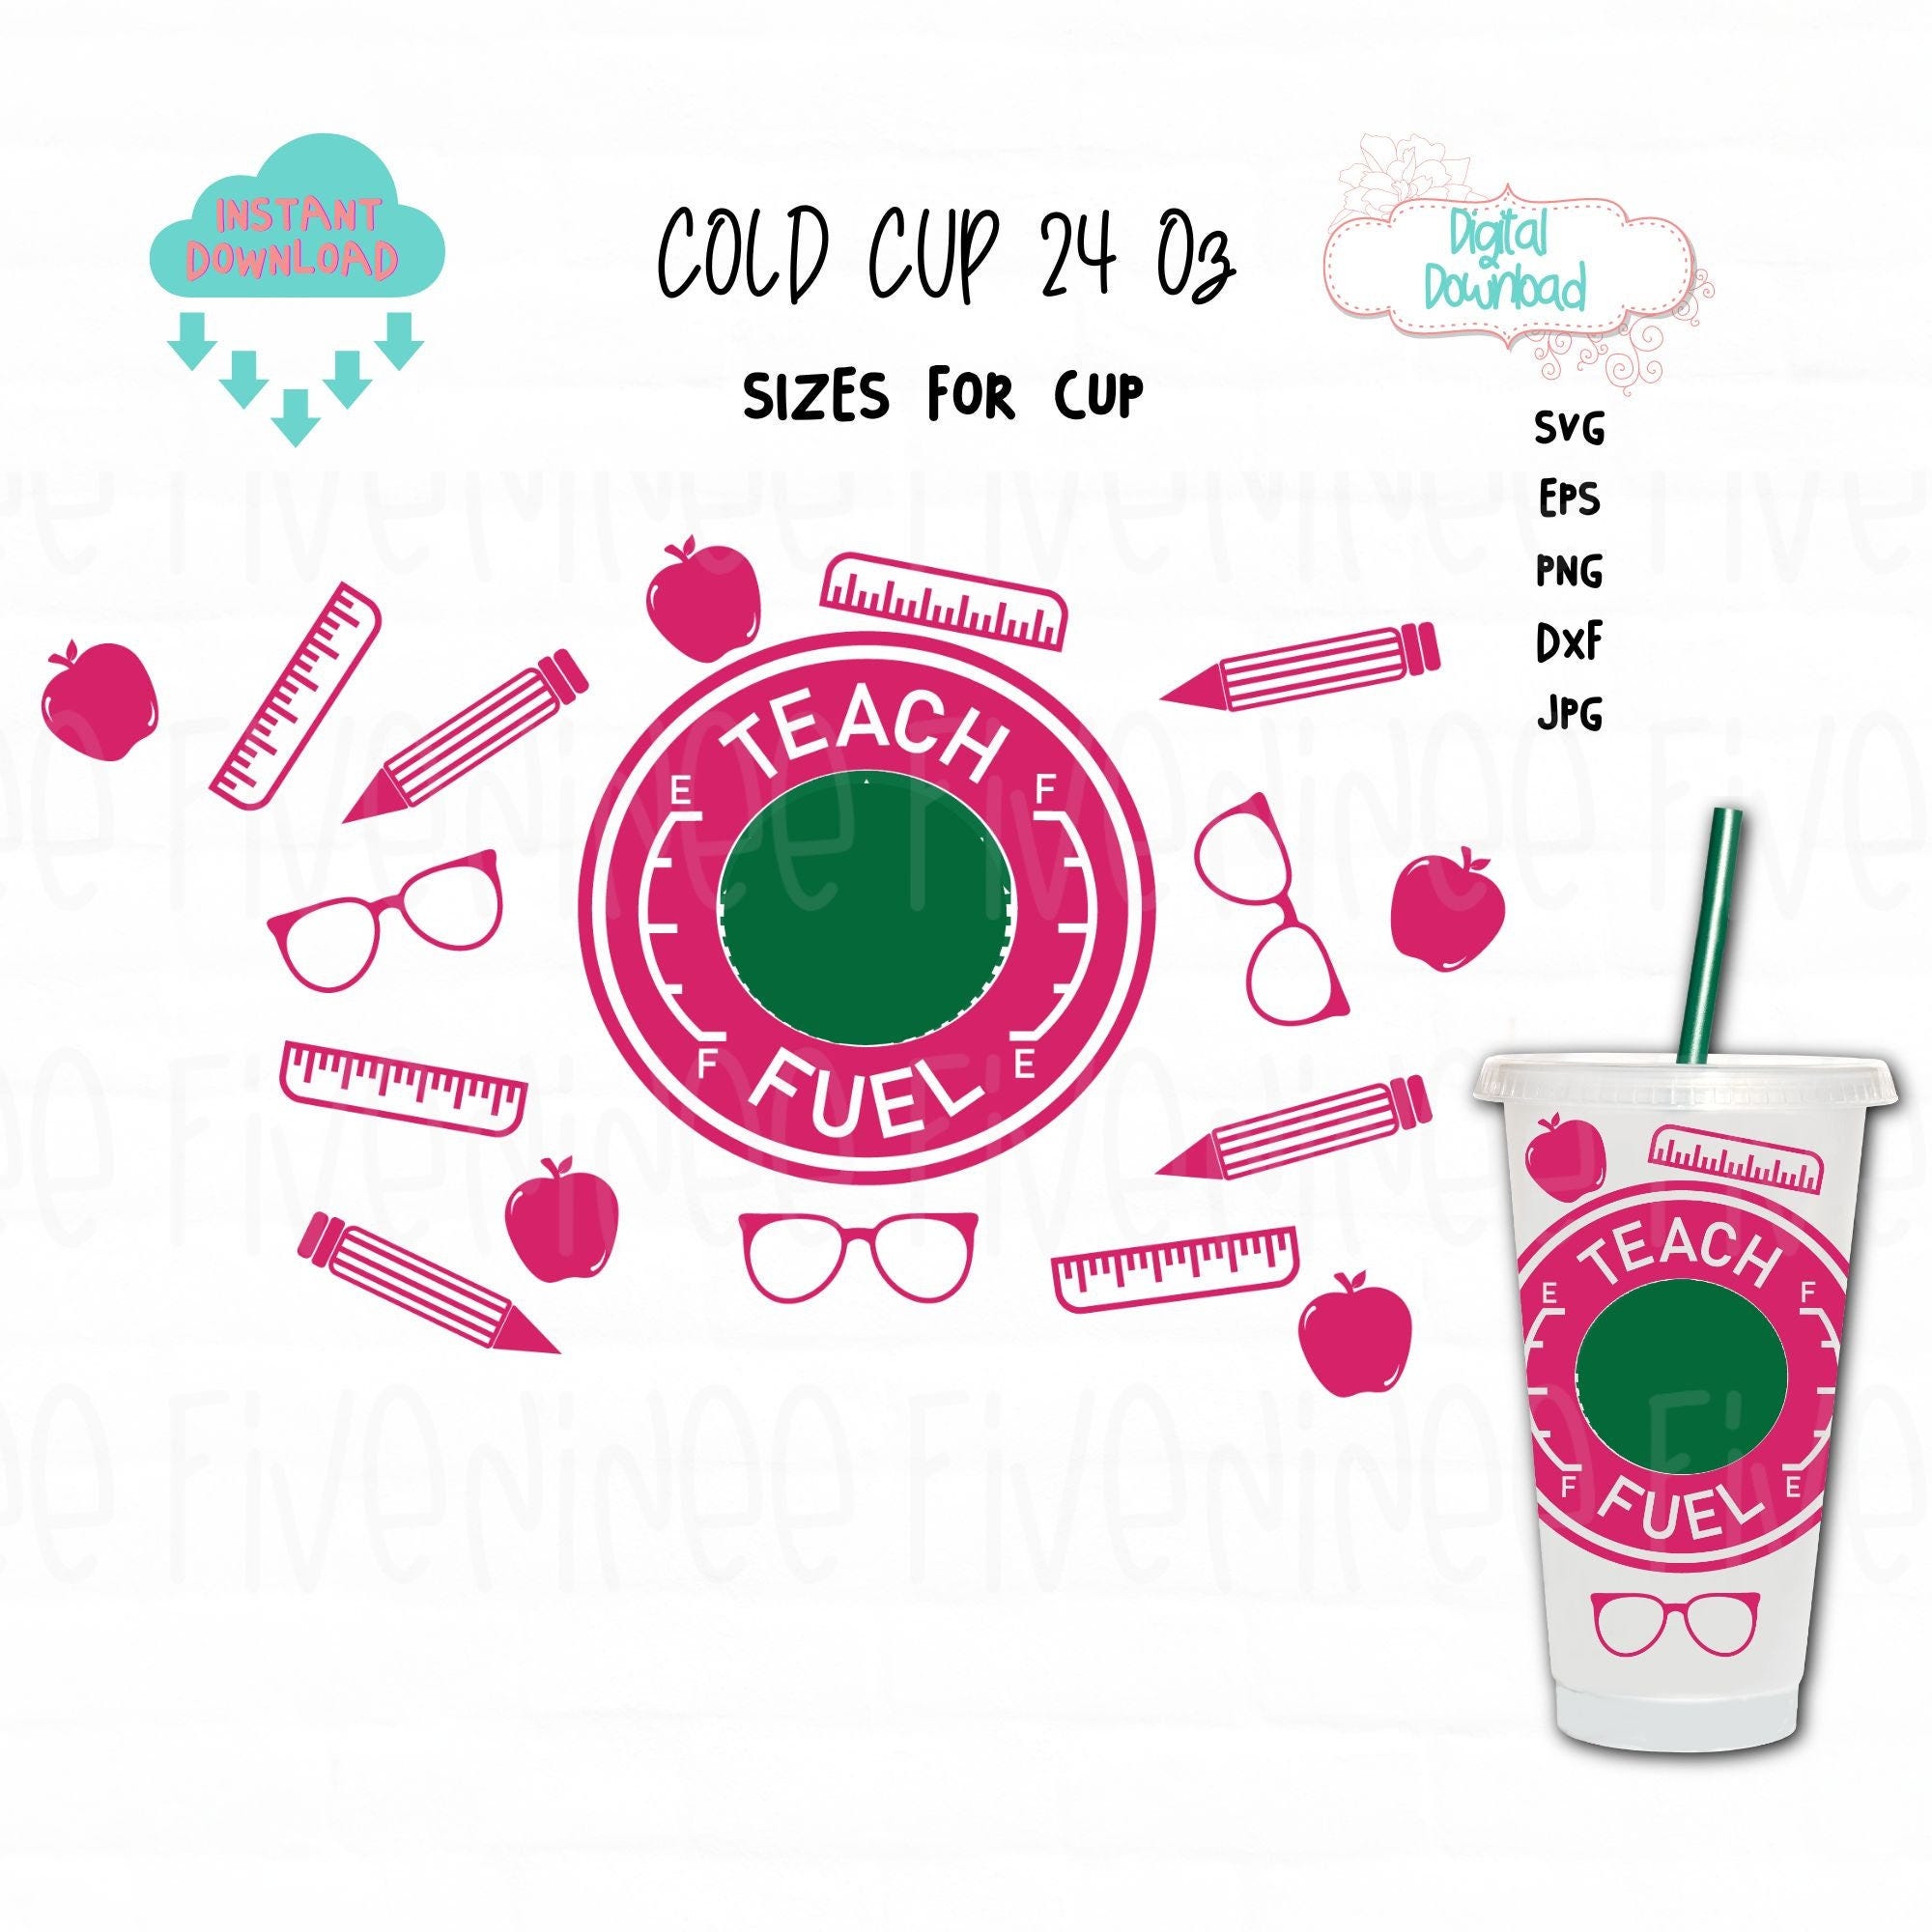 Teacher Fuel Cup Ring svg, Full Wrap Cup Teacher svg, Teacher Fuel Decal DIY Cup, Teacher Apple svg, Teacher Coffee, Decal DIY Teacher Fuel